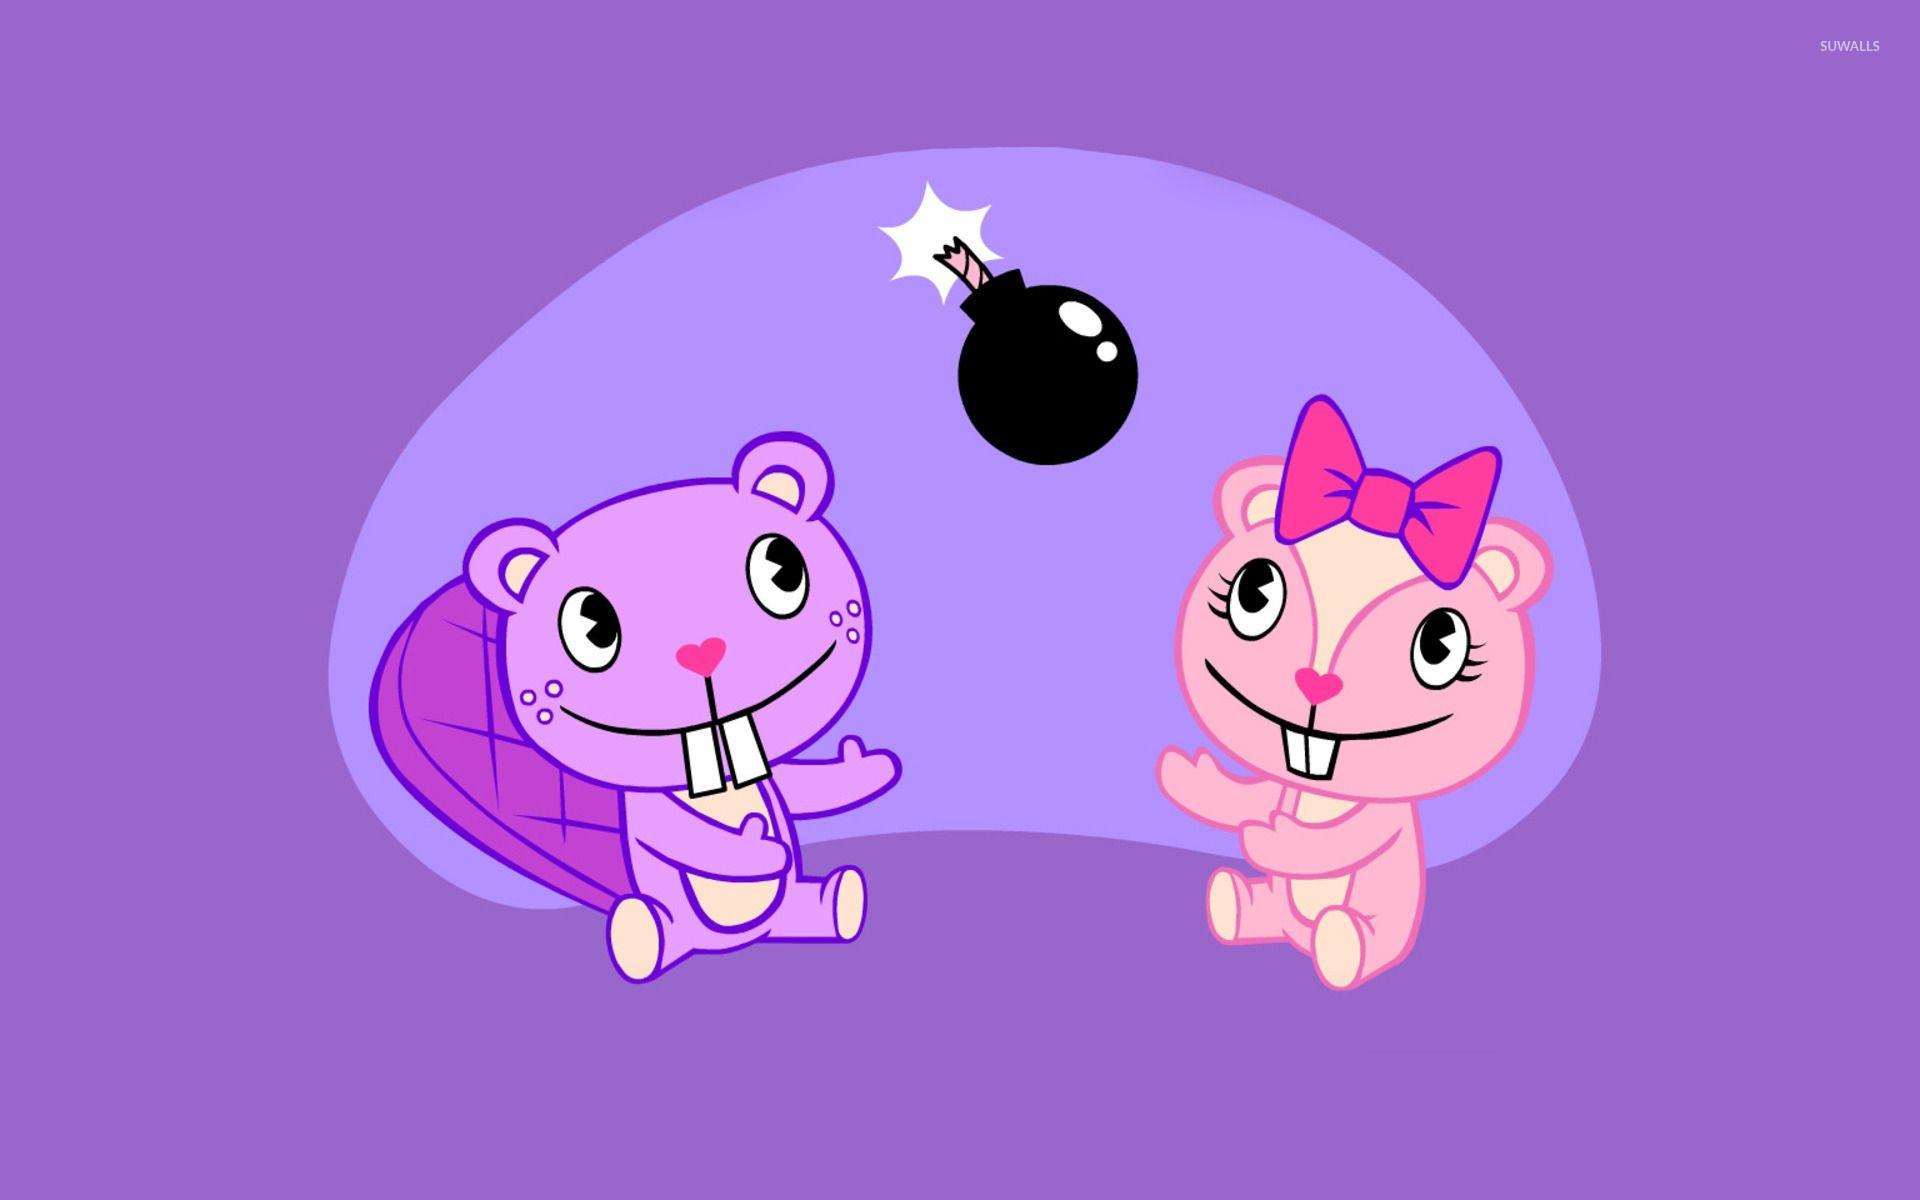 Wallpaper.wiki Happy Tree Friends Image 1920x1200 PIC WPB007155